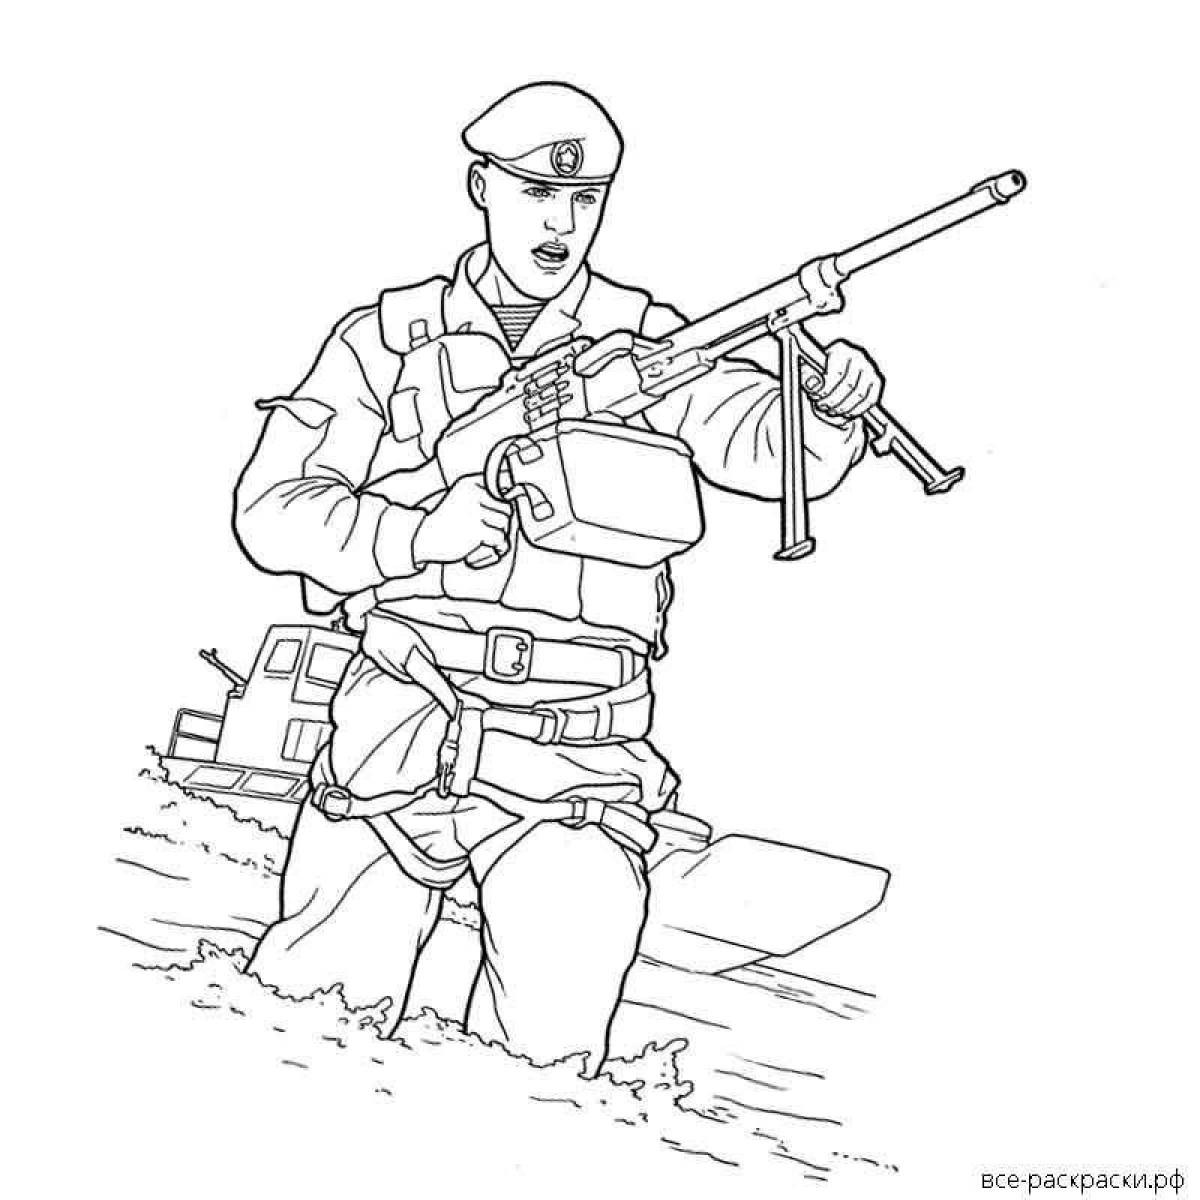 Elegant coloring pages of military soldiers